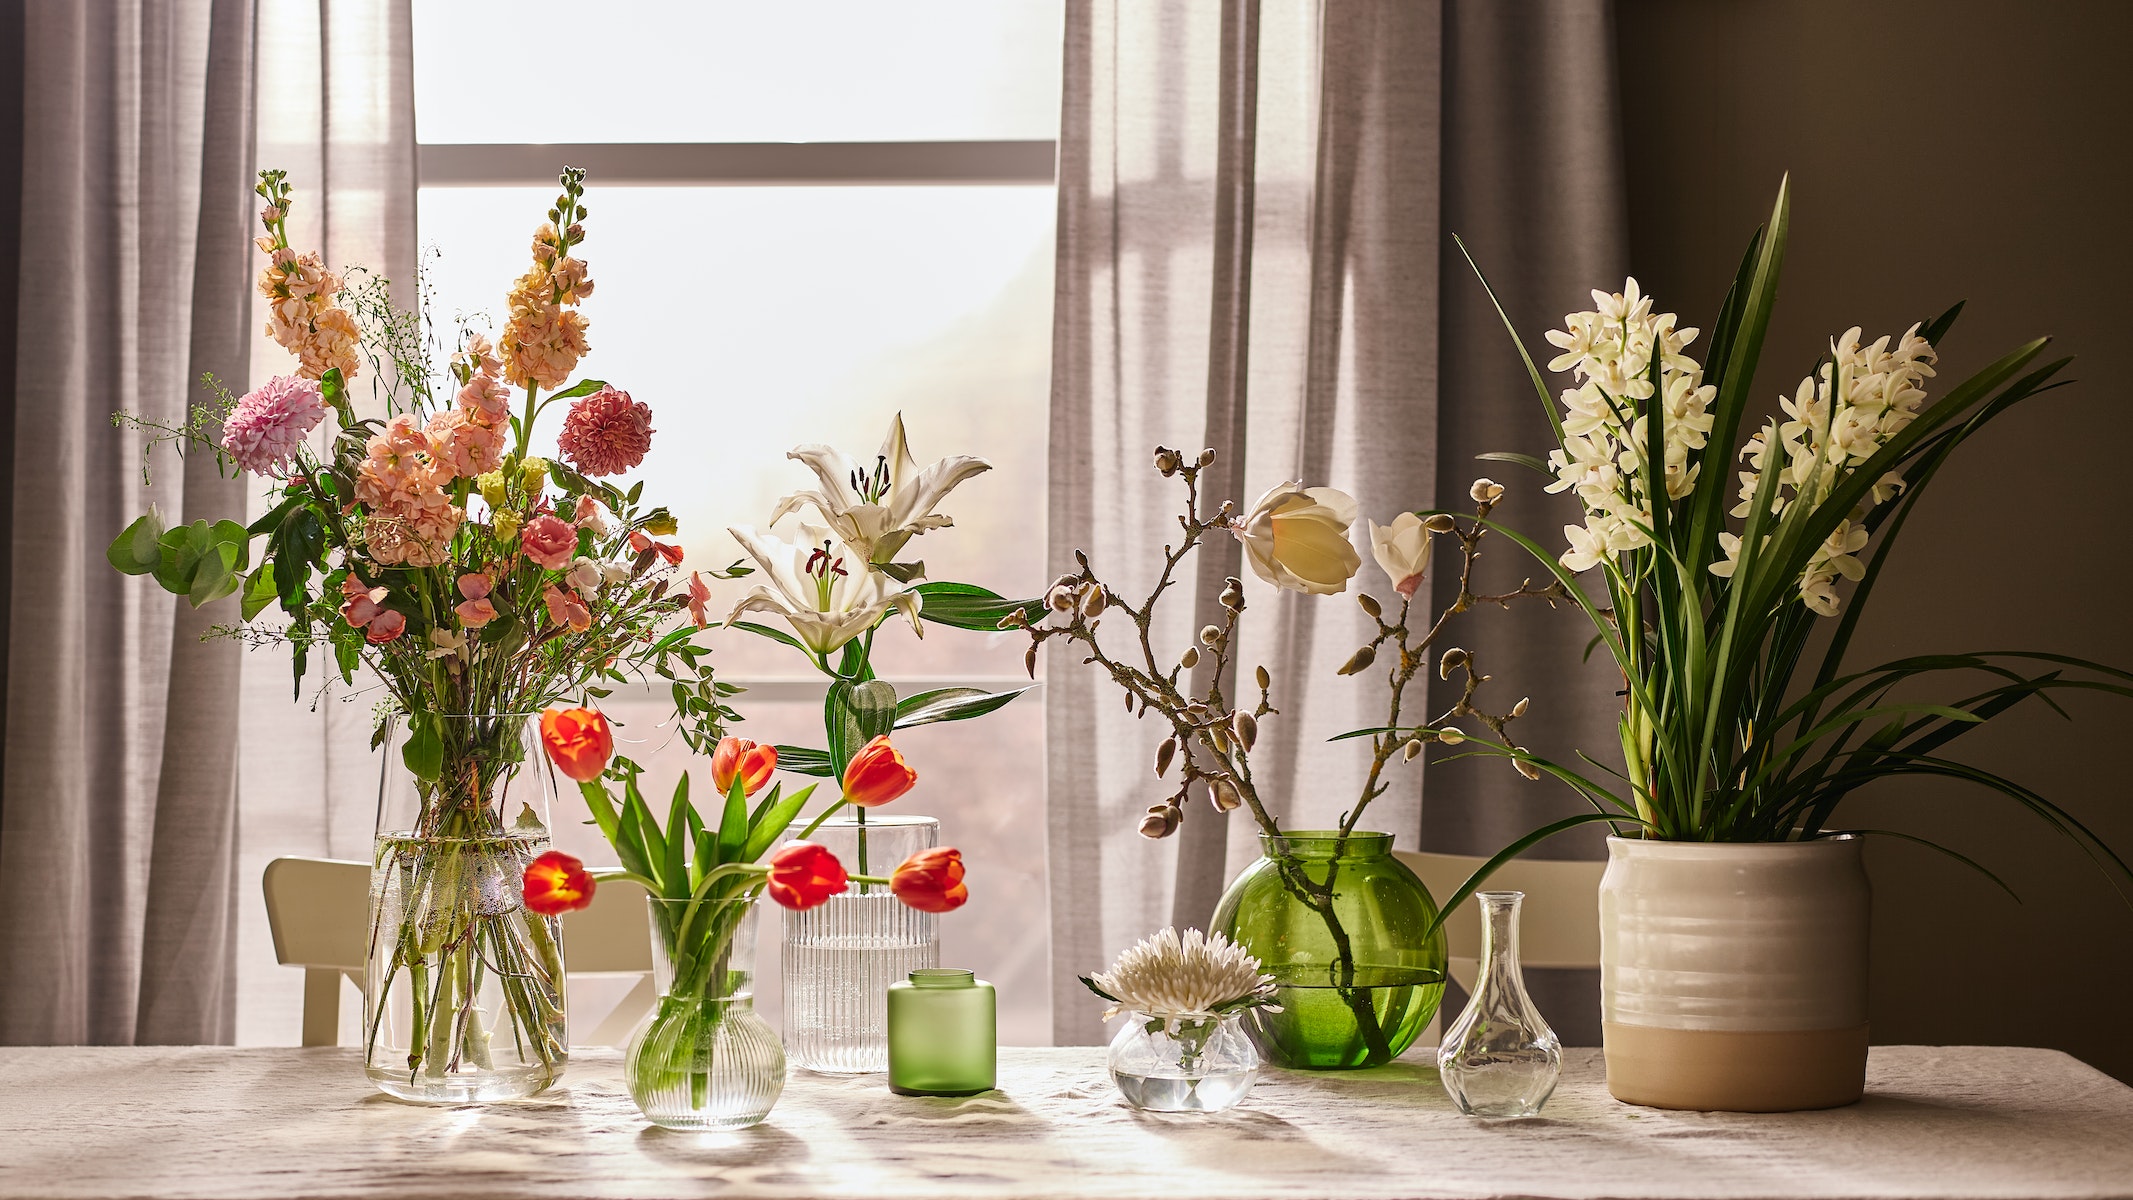 IKEA - How to choose the right vase for your flowers